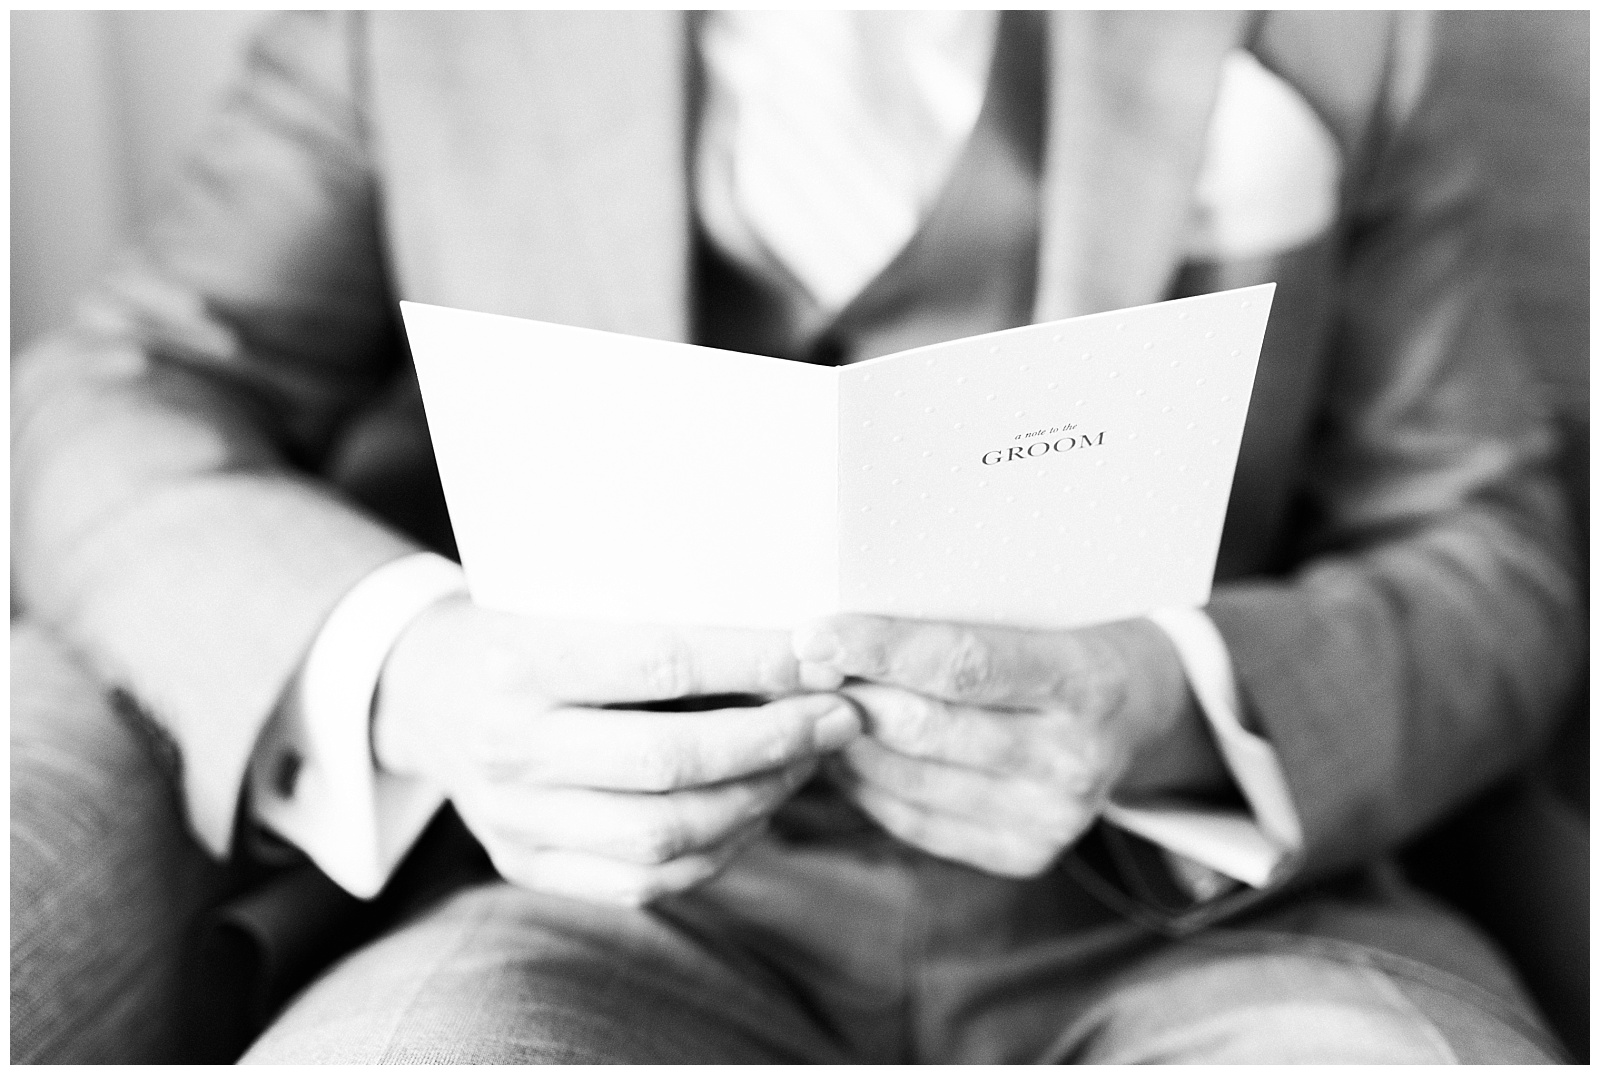 Close up of groom reading a card from the bride in black and white.